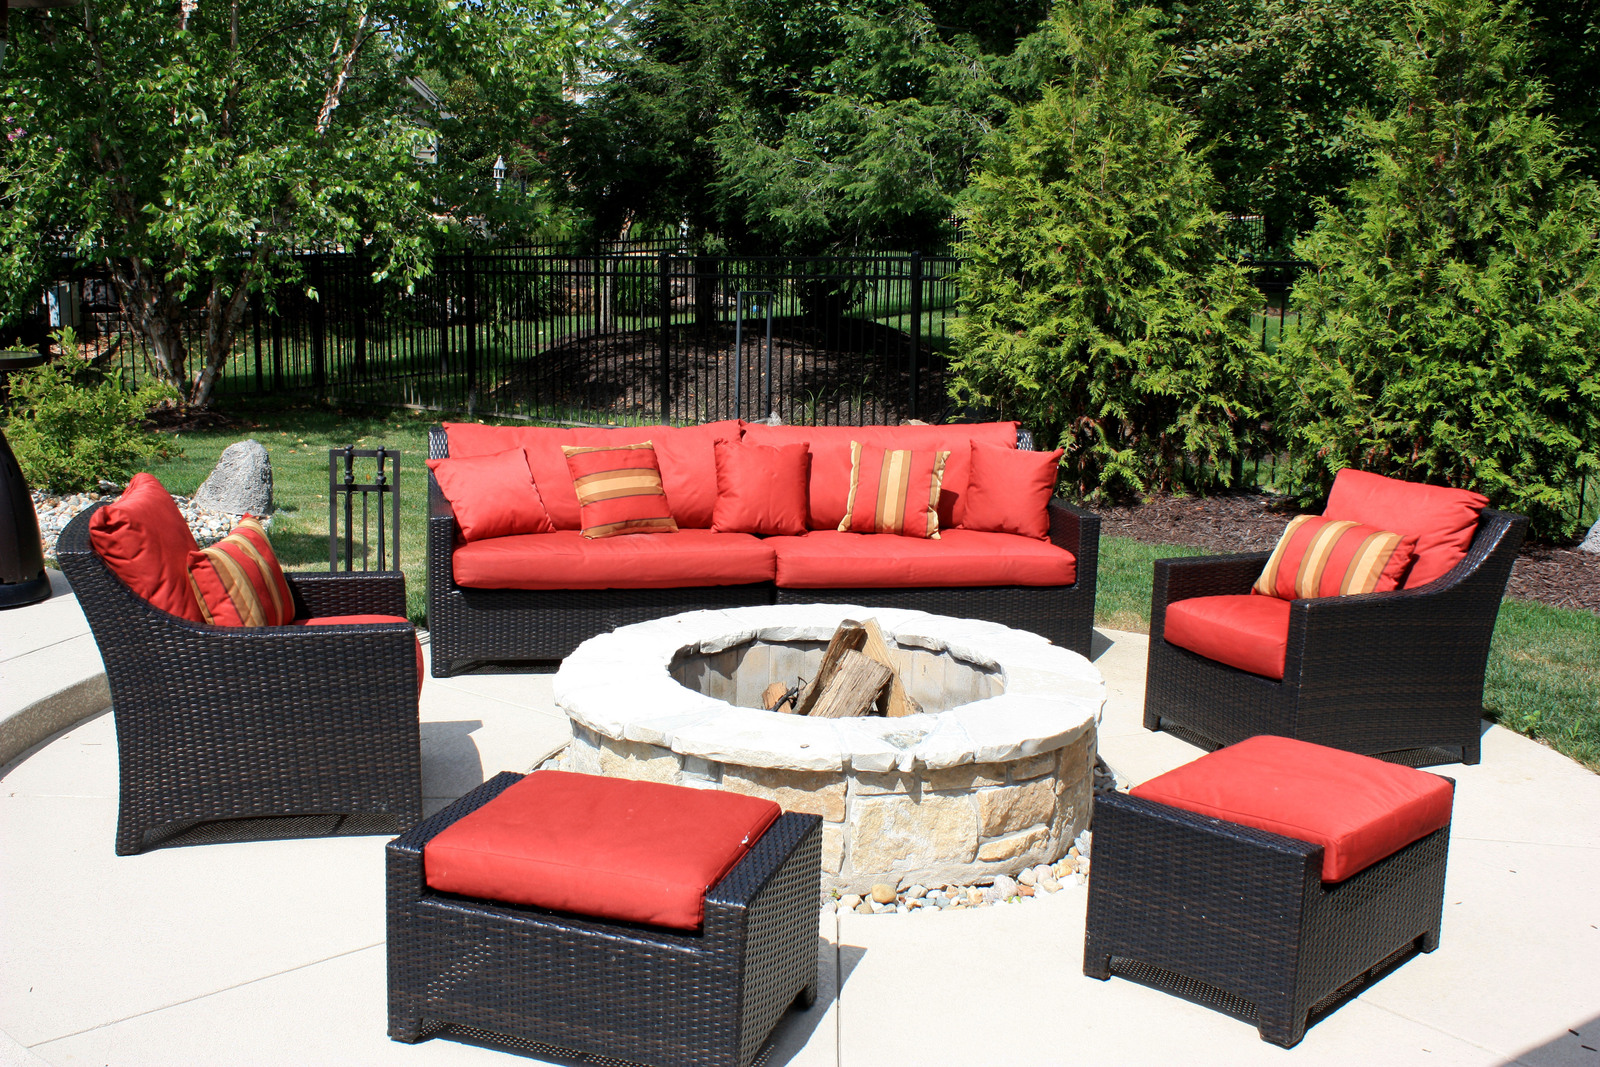 Baker Pool Construction of St. Louis | Builder of Outdoor Fireplaces and Fire Pits